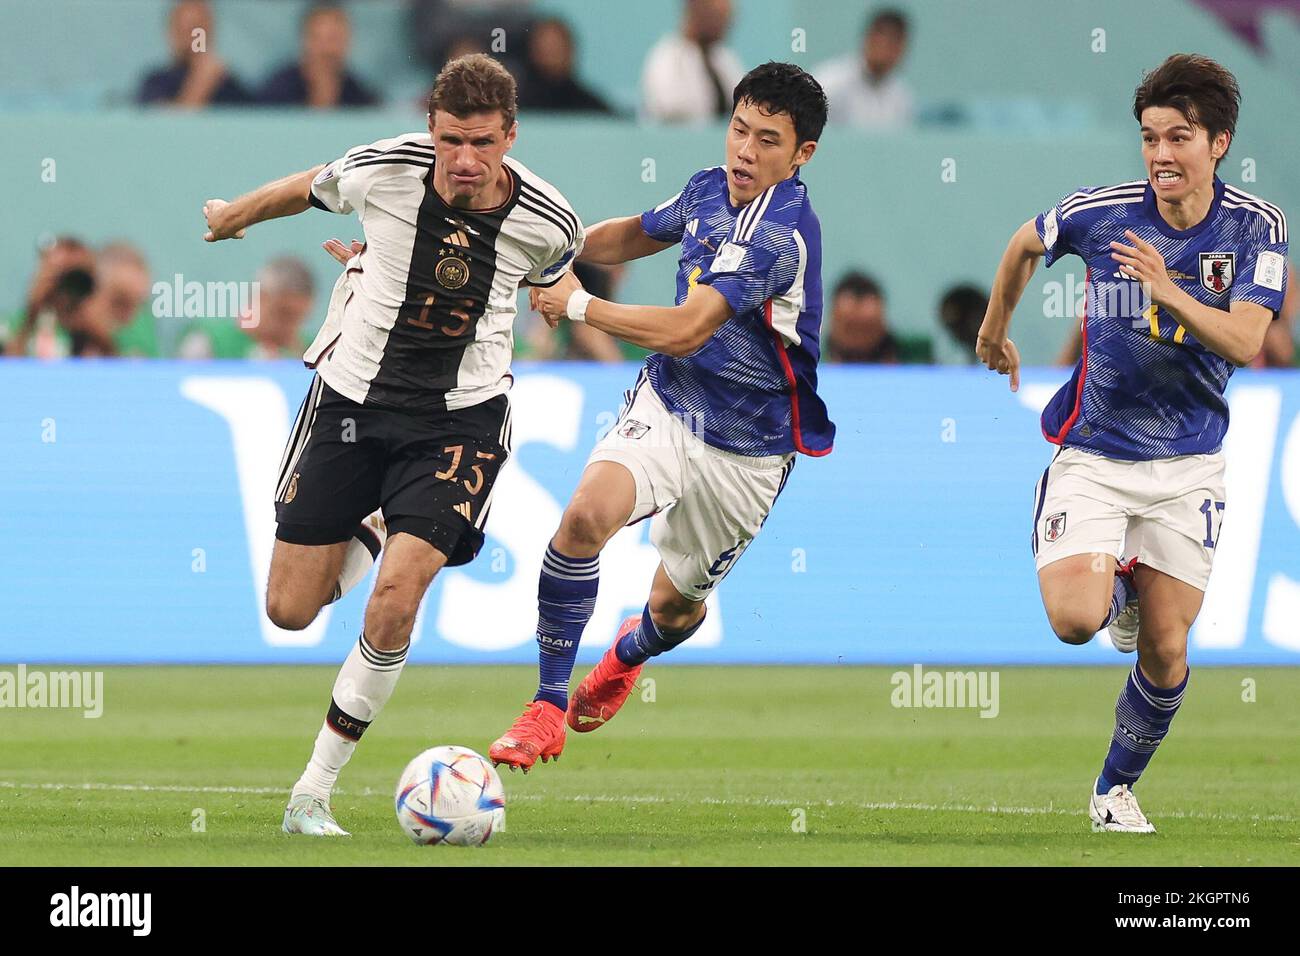 Doha, Qatar. 23rd Nov, 2022. Thomas Mueller (L) of Germany vies with Endo Wataru (C) of Japan during the Group E match between Germany and Japan at the 2022 FIFA World Cup at Khalifa International Stadium in Doha, Qatar, Nov. 23, 2022. Credit: Cao Can/Xinhua/Alamy Live News Stock Photo